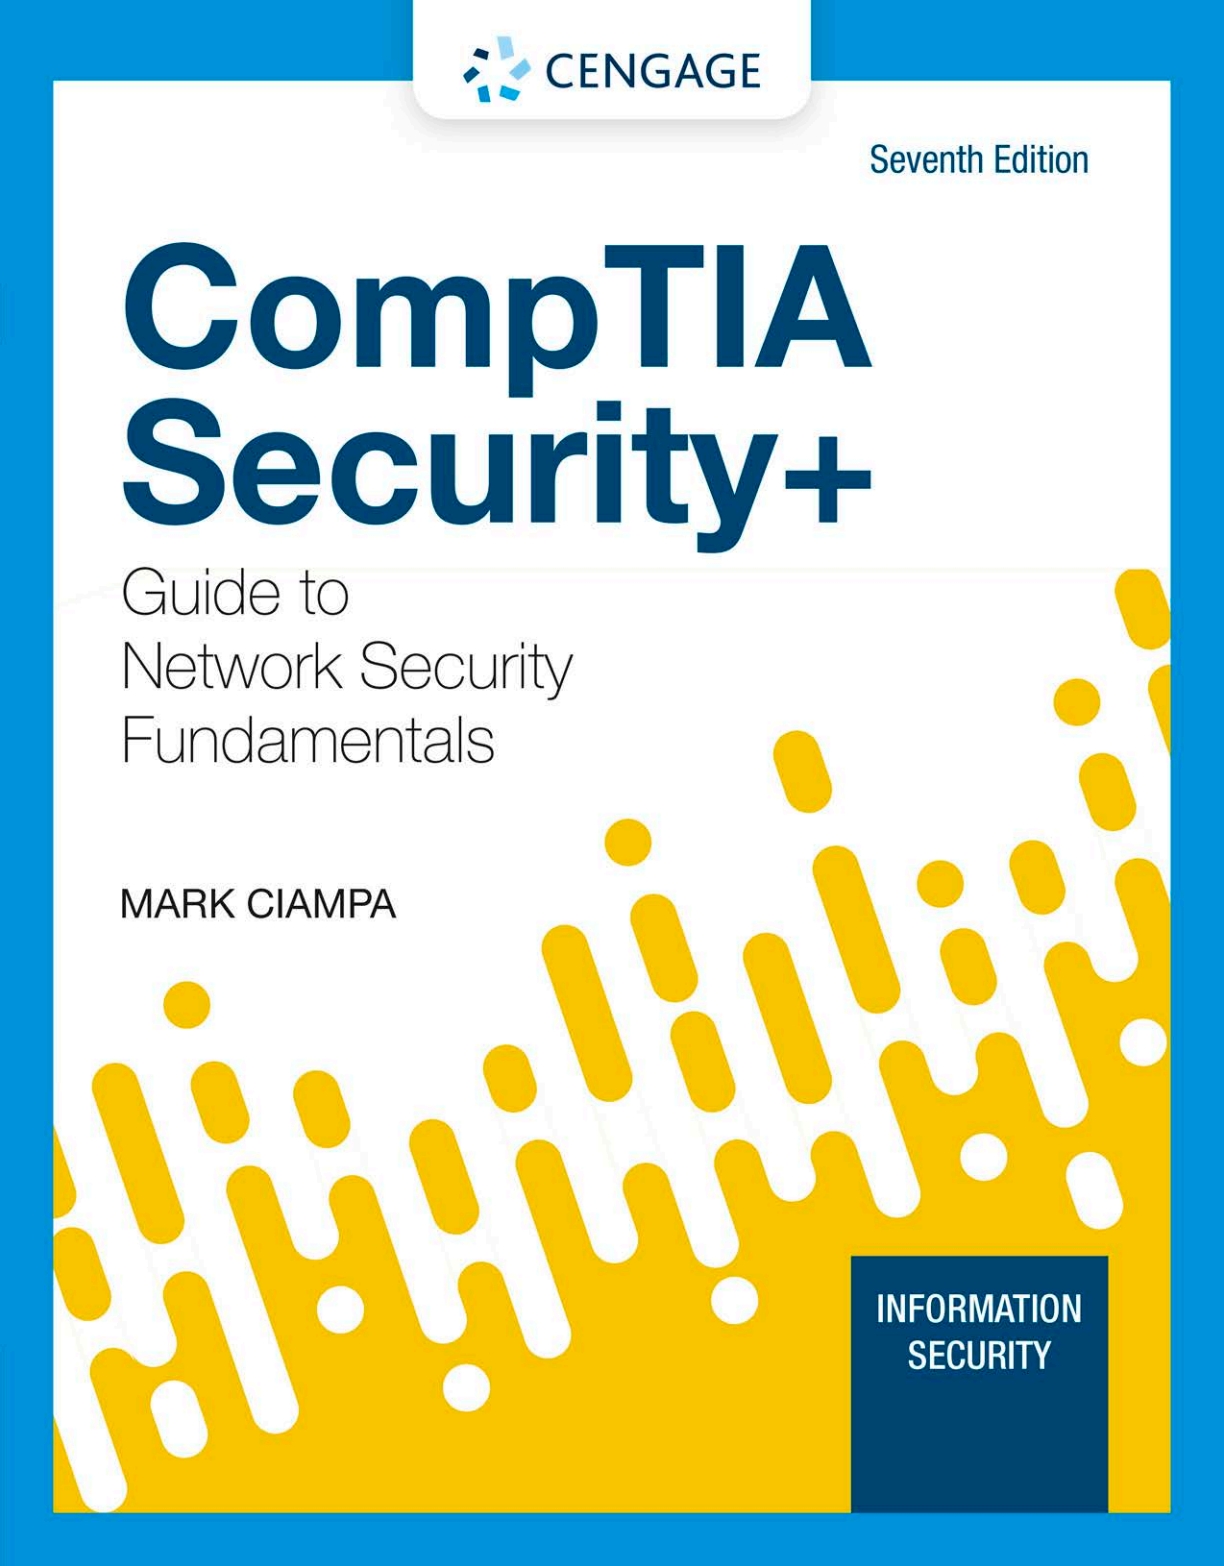 CompTIA Security + Guide to Network Security Fundamentals (7th Edition) – eBook PDF